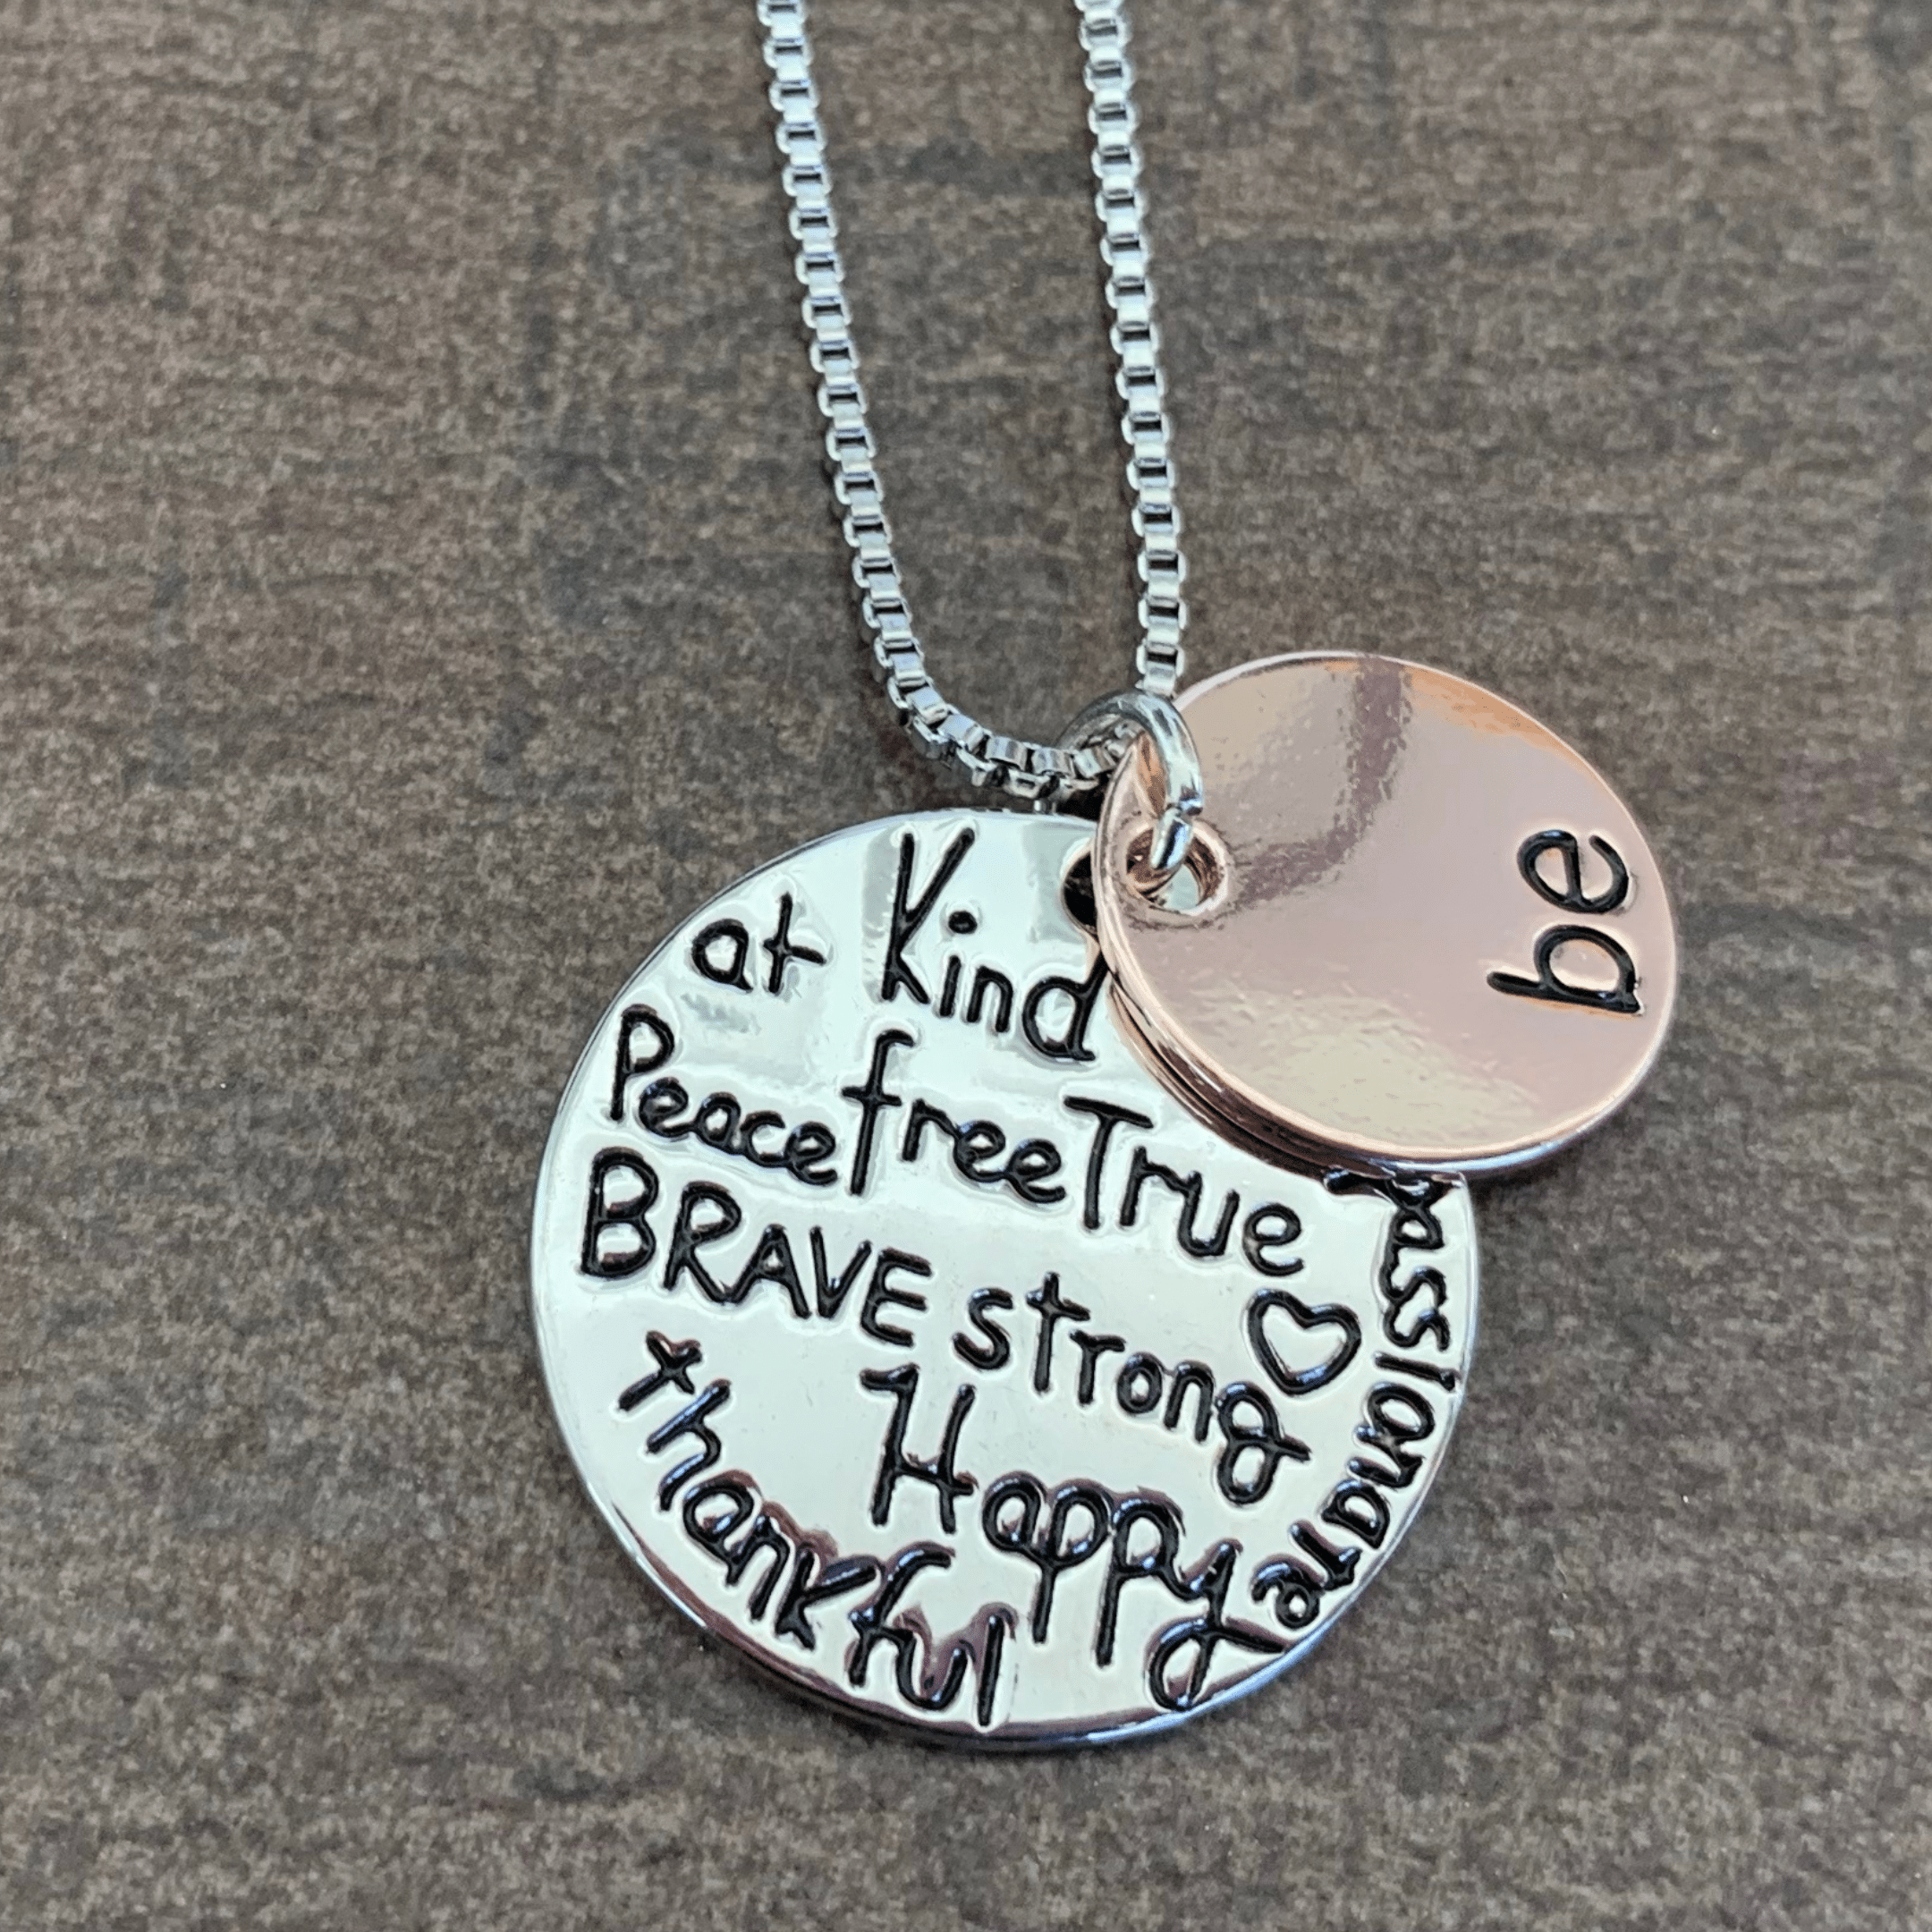 ThriftyGoddess "be" Inspirational Hand Stamped Necklaces - "Be"